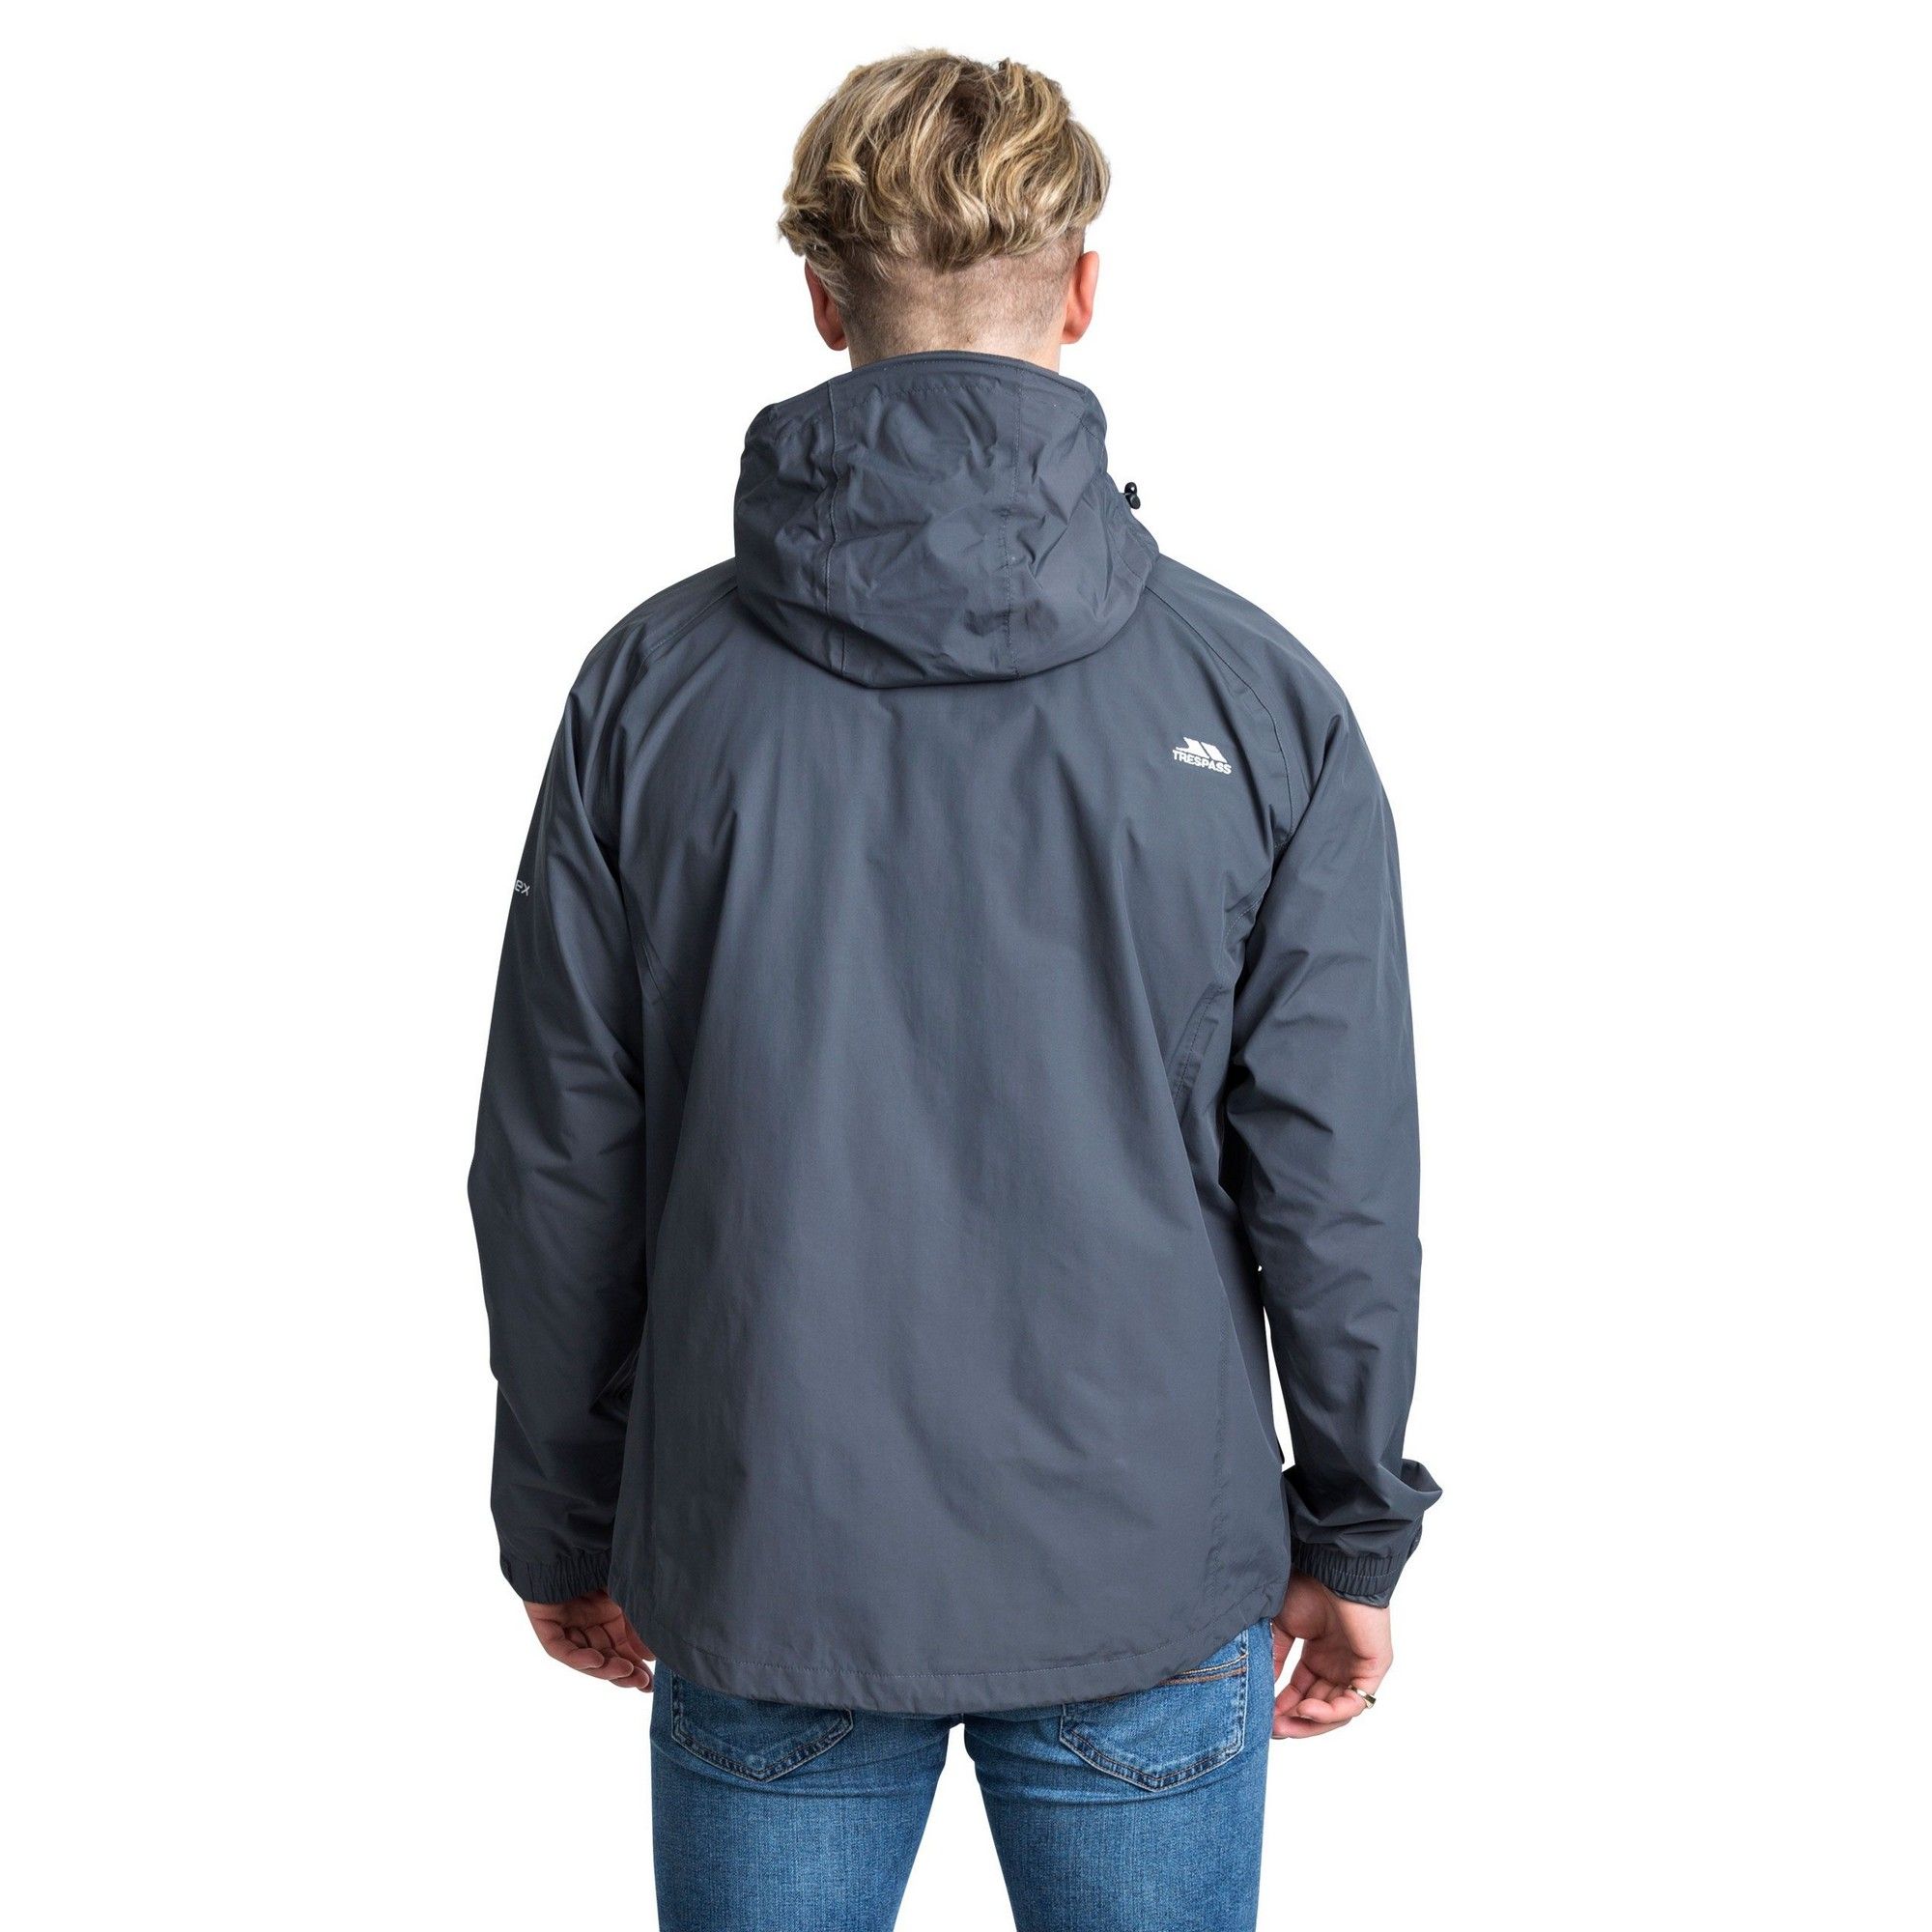 Waterproof jacket with adjustable concealed hood. 2 zipped lower pockets. Zipped chest pocket. Hem drawcord with side adjusters. Elasticated cuff with tab adjuster. Inner zipped pocket. Waterproof 5000mm, breathable 5000mvp, windproof, taped seams. Shell: 100% polyamide taslan, PU coating. Lining: 100% polyester. Trespass Mens Chest Sizing (approx): S - 35-37in/89-94cm, M - 38-40in/96.5-101.5cm, L - 41-43in/104-109cm, XL - 44-46in/111.5-117cm, XXL - 46-48in/117-122cm, 3XL - 48-50in/122-127cm.